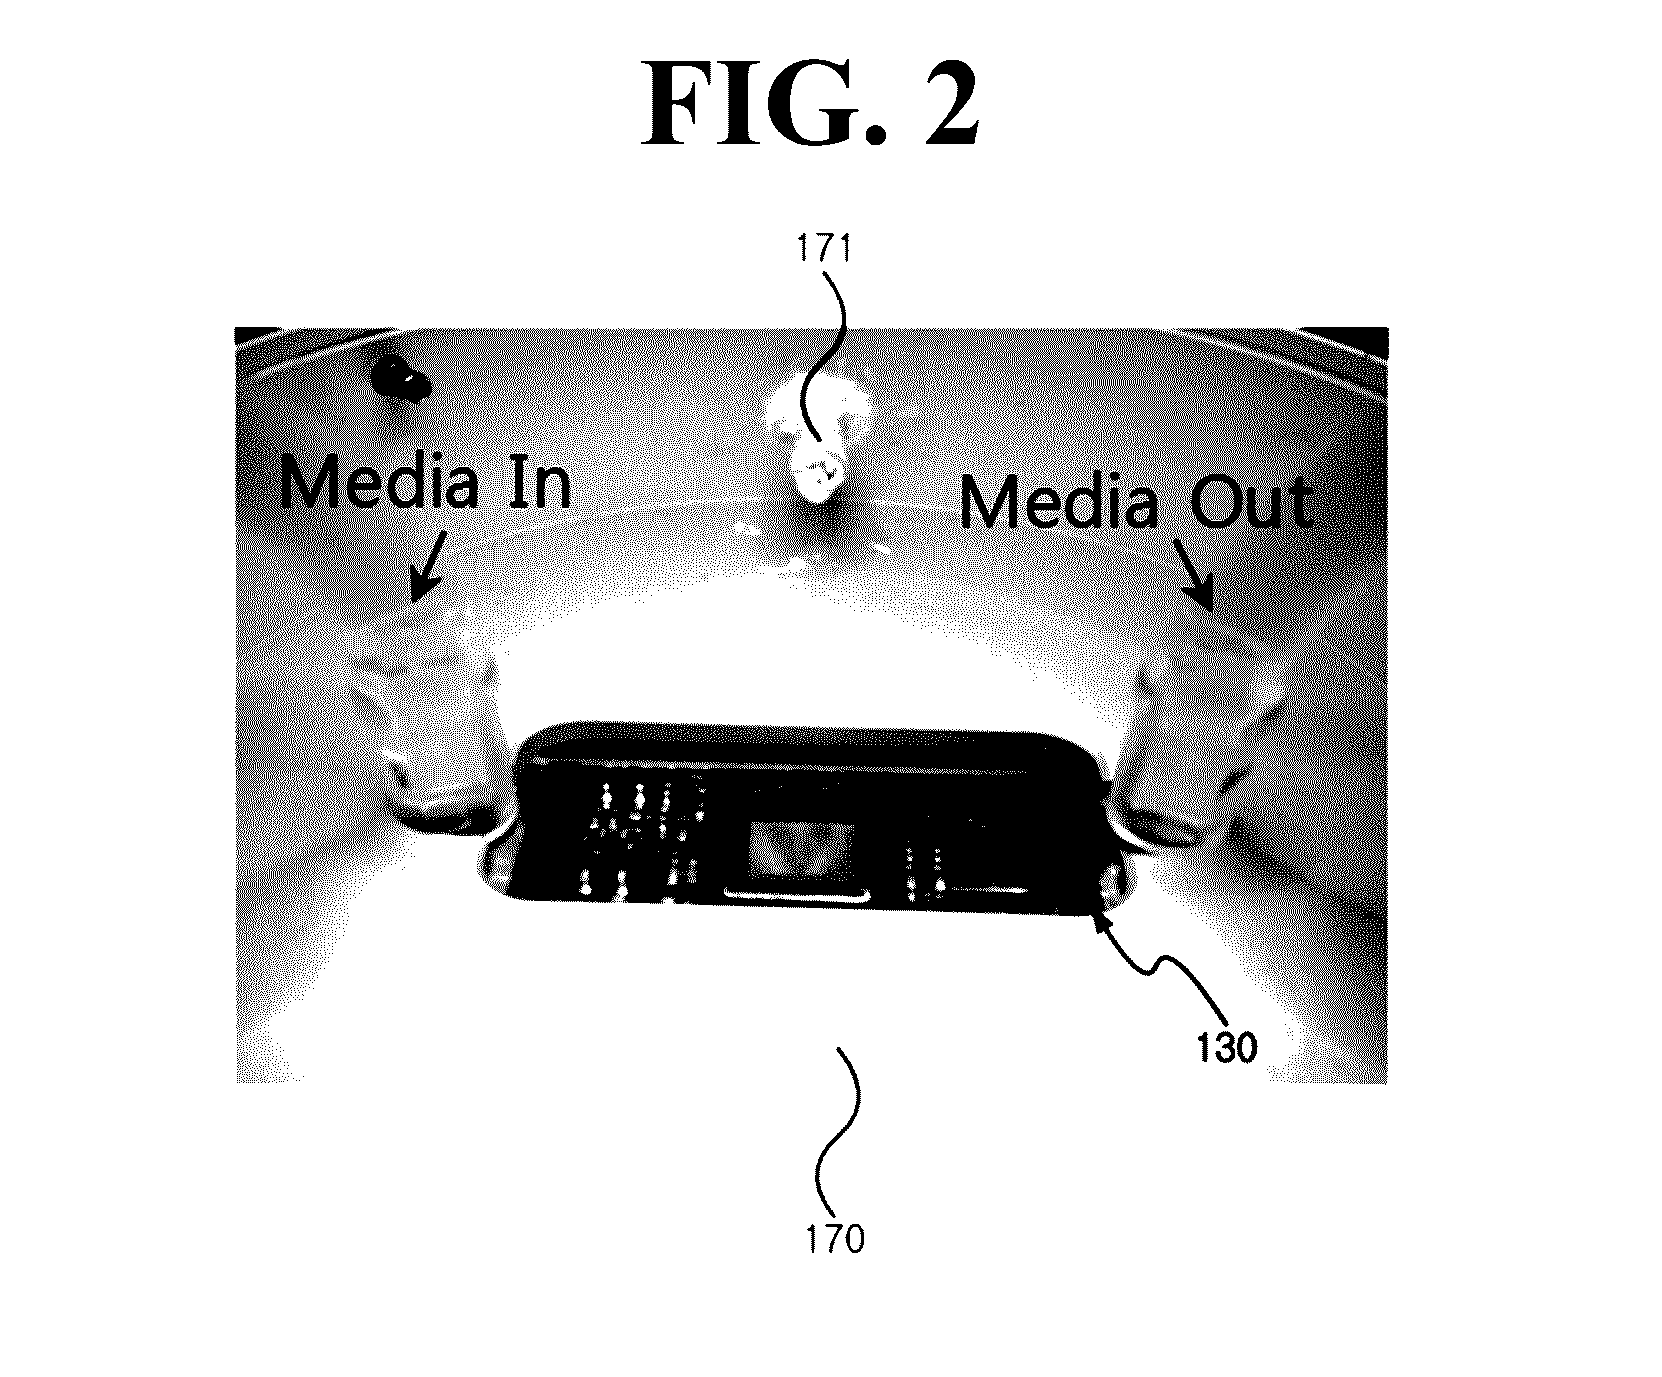 Apparatus for measuring cell activity and method for analyzing cell activity